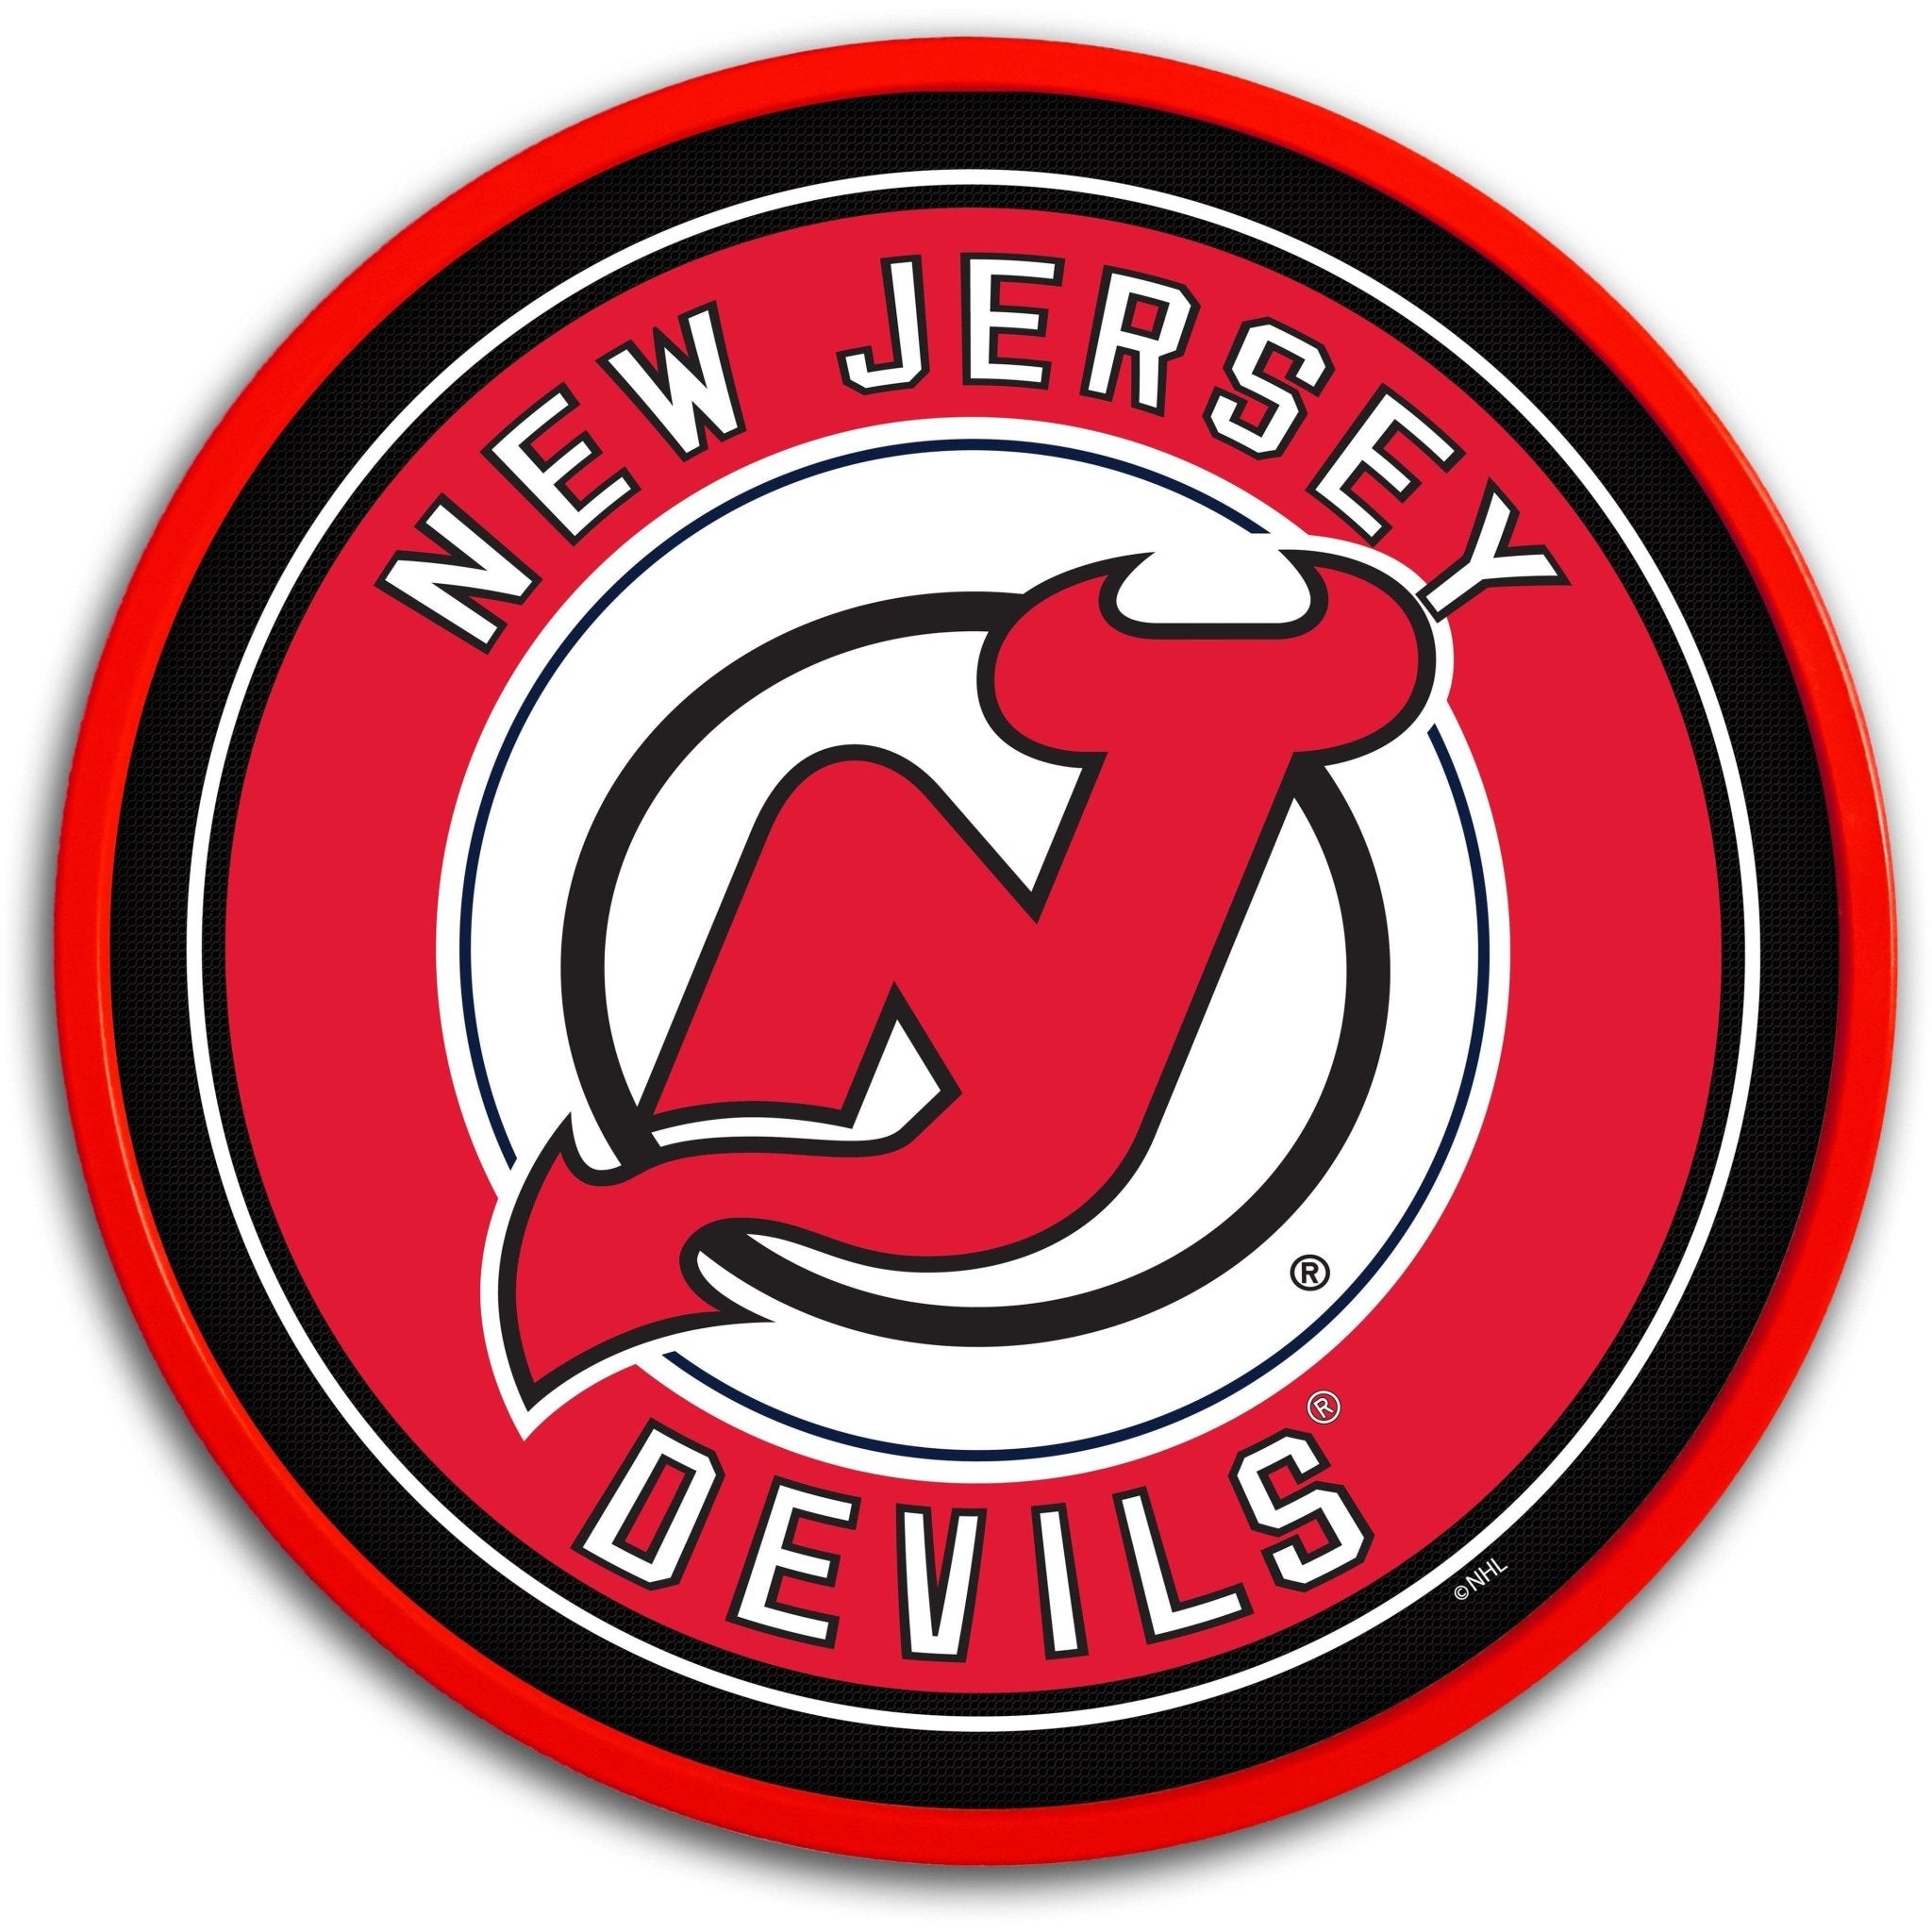 The Devil went down to … New Jersey?